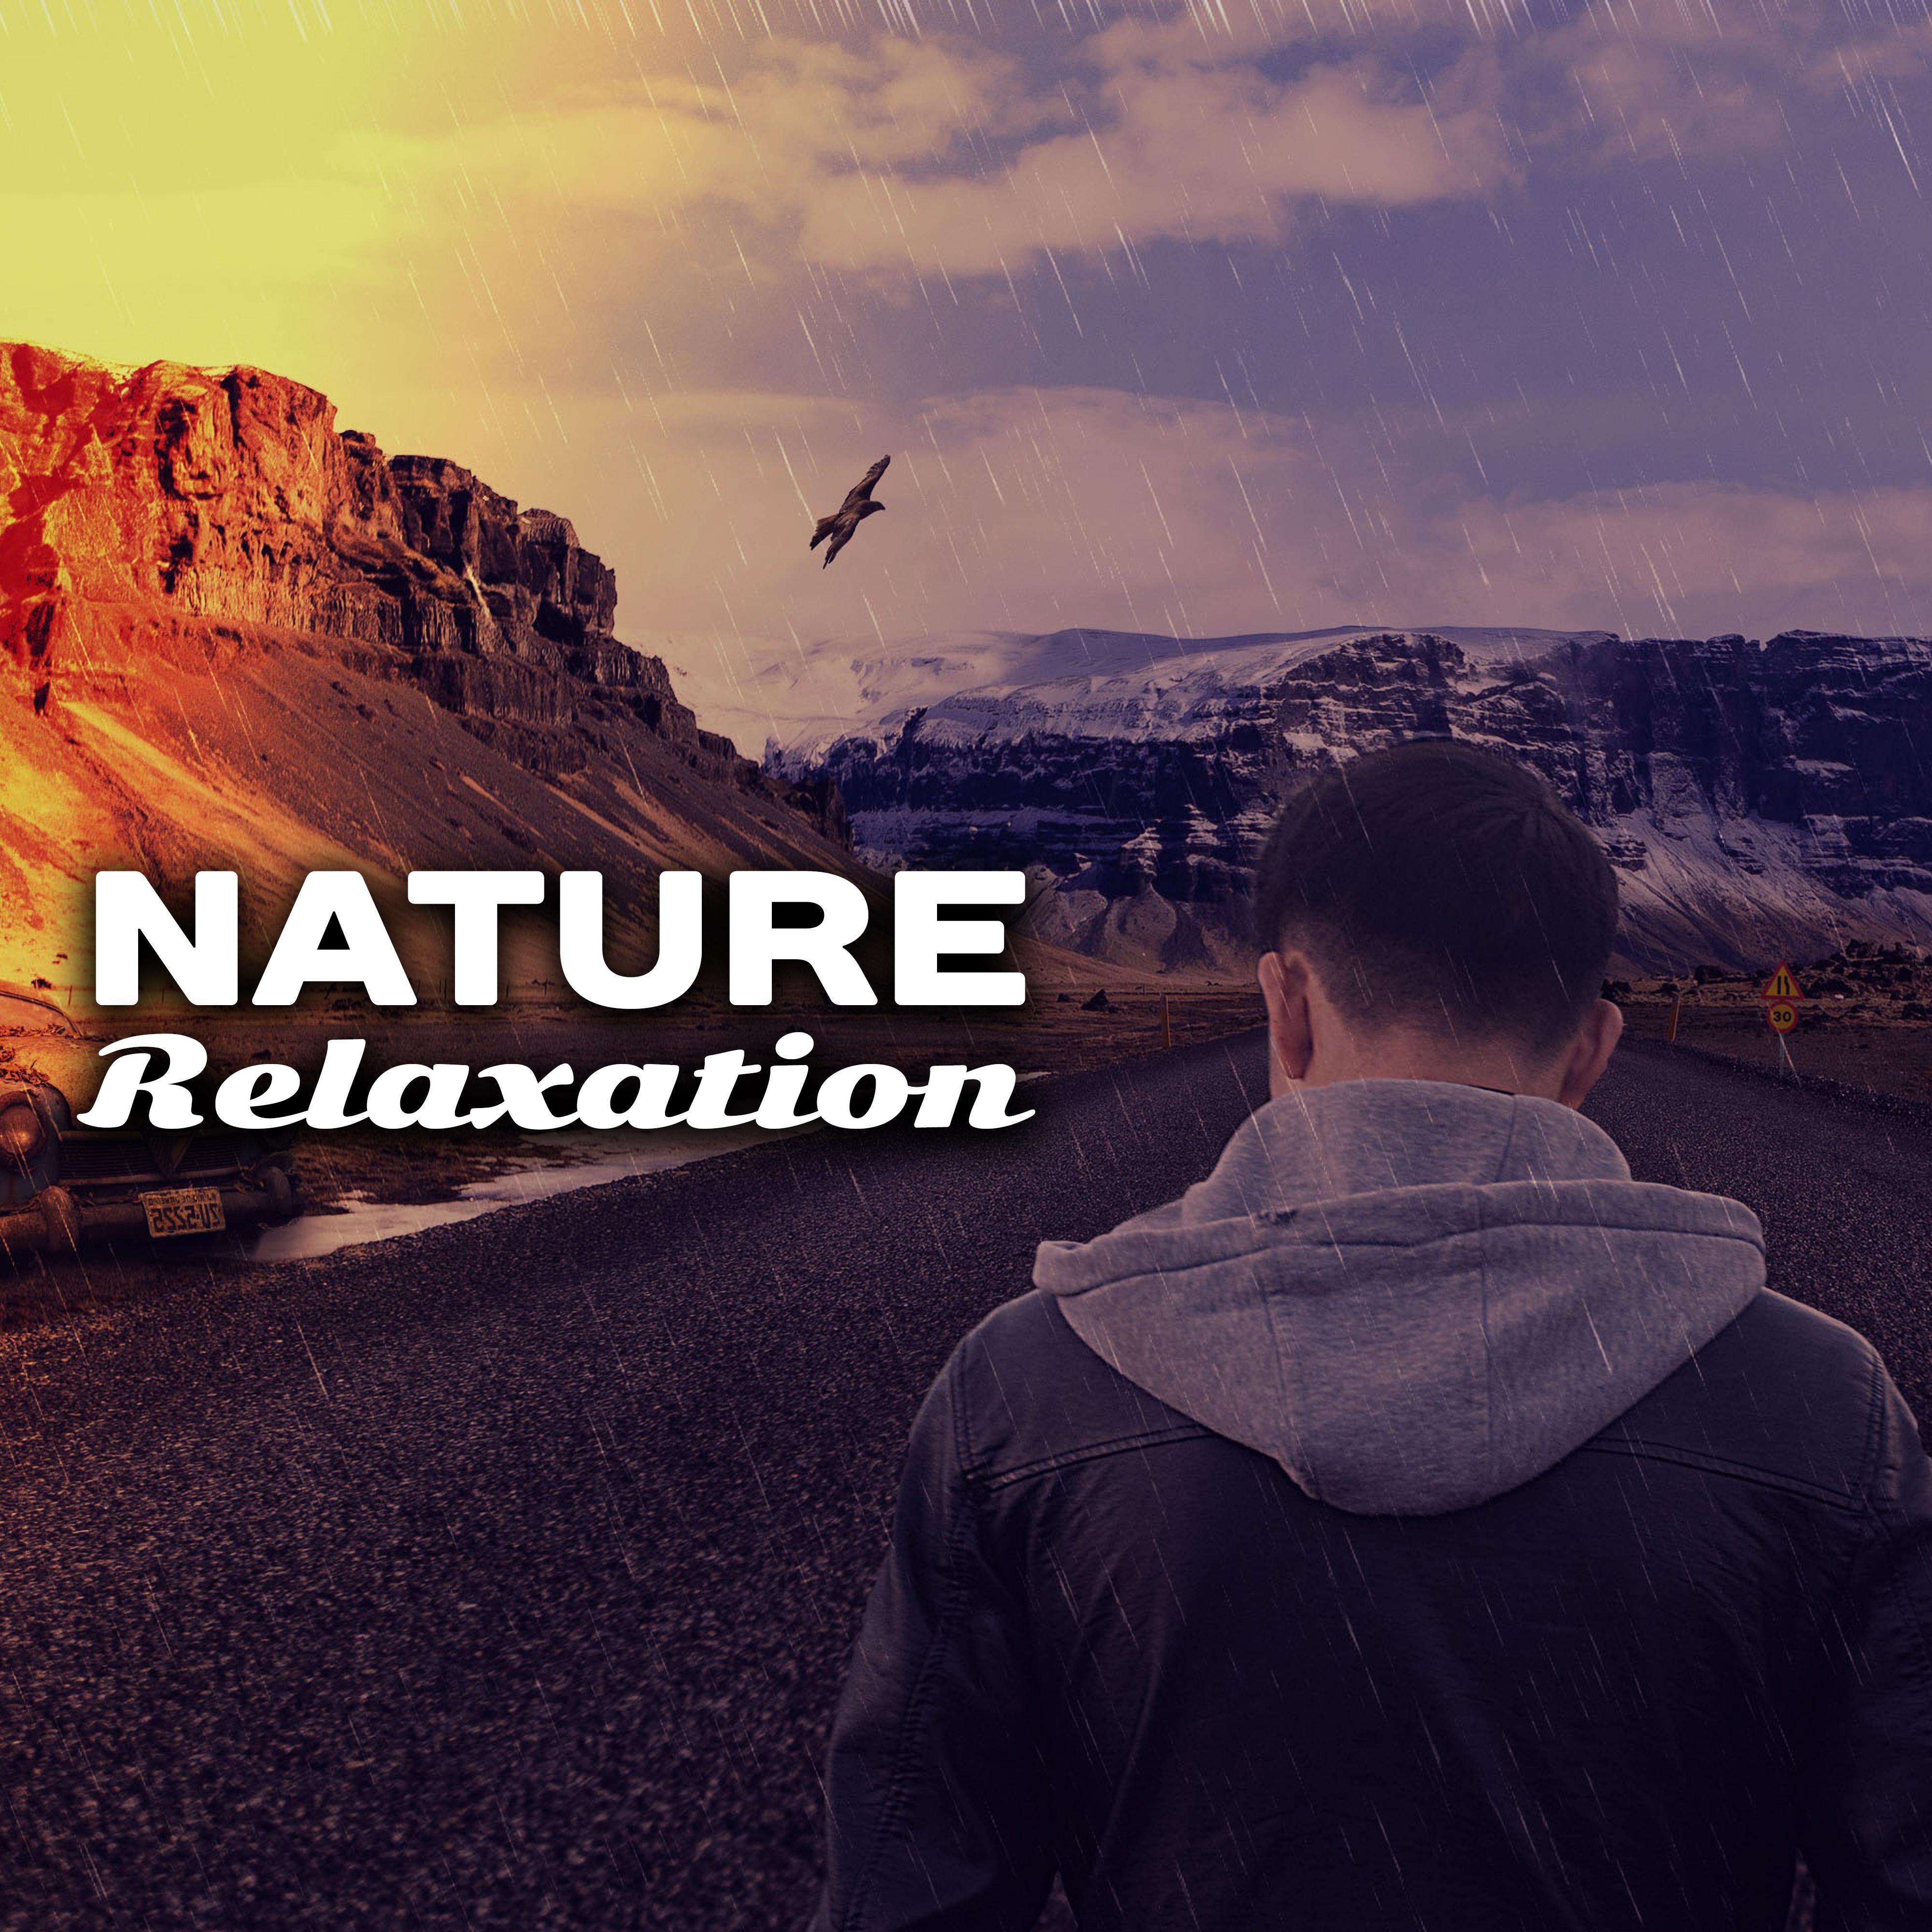 Nature Relaxation  New Age Music, Manage Stress, Rest, Deep Meditation, Pure Relaxation, Zen